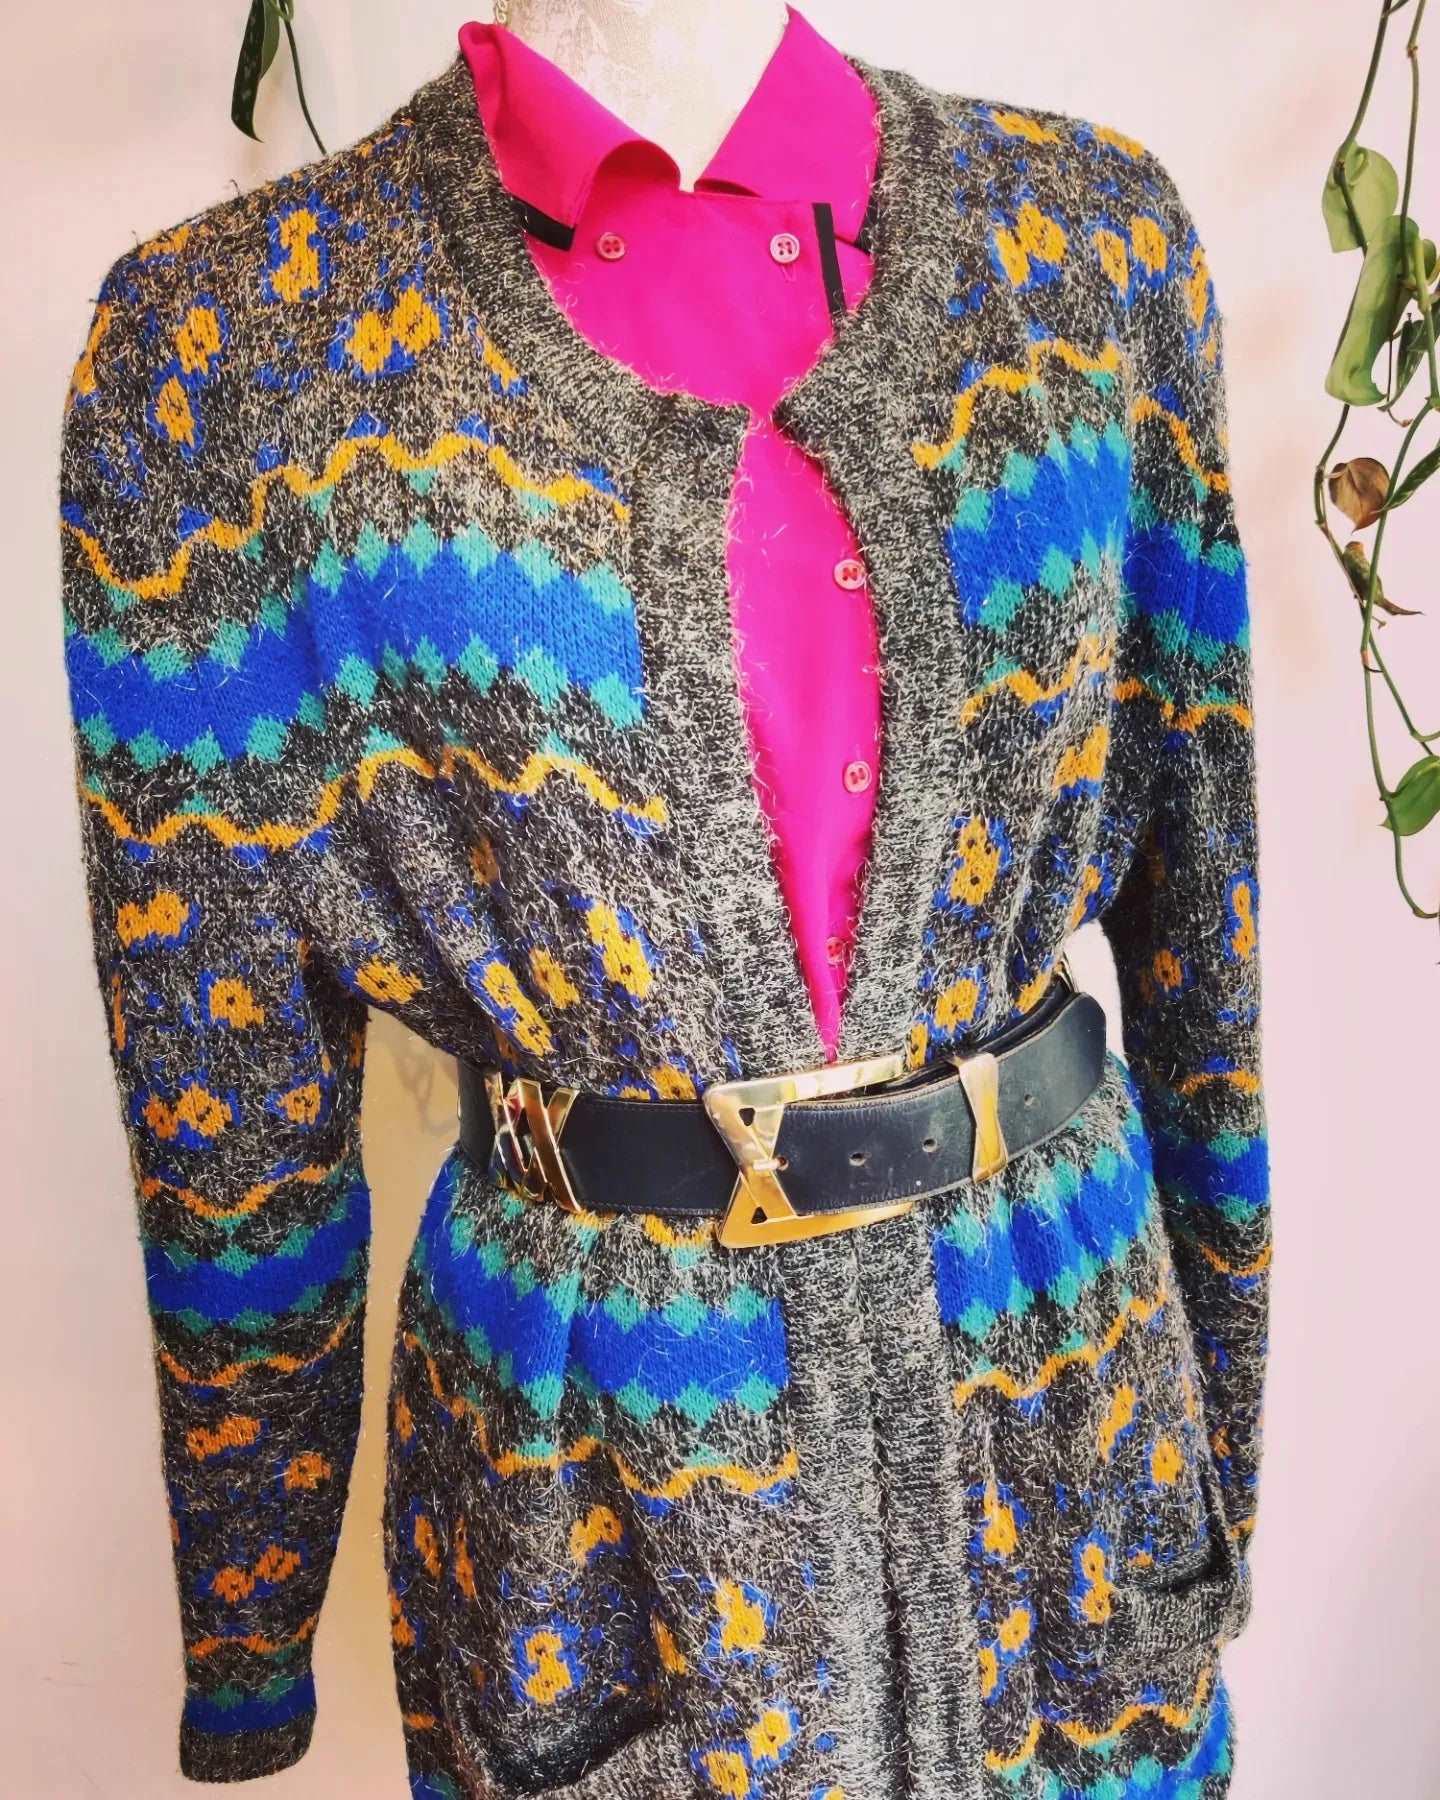 Vintage multicoloured knitted cardigan. Size 12-18.